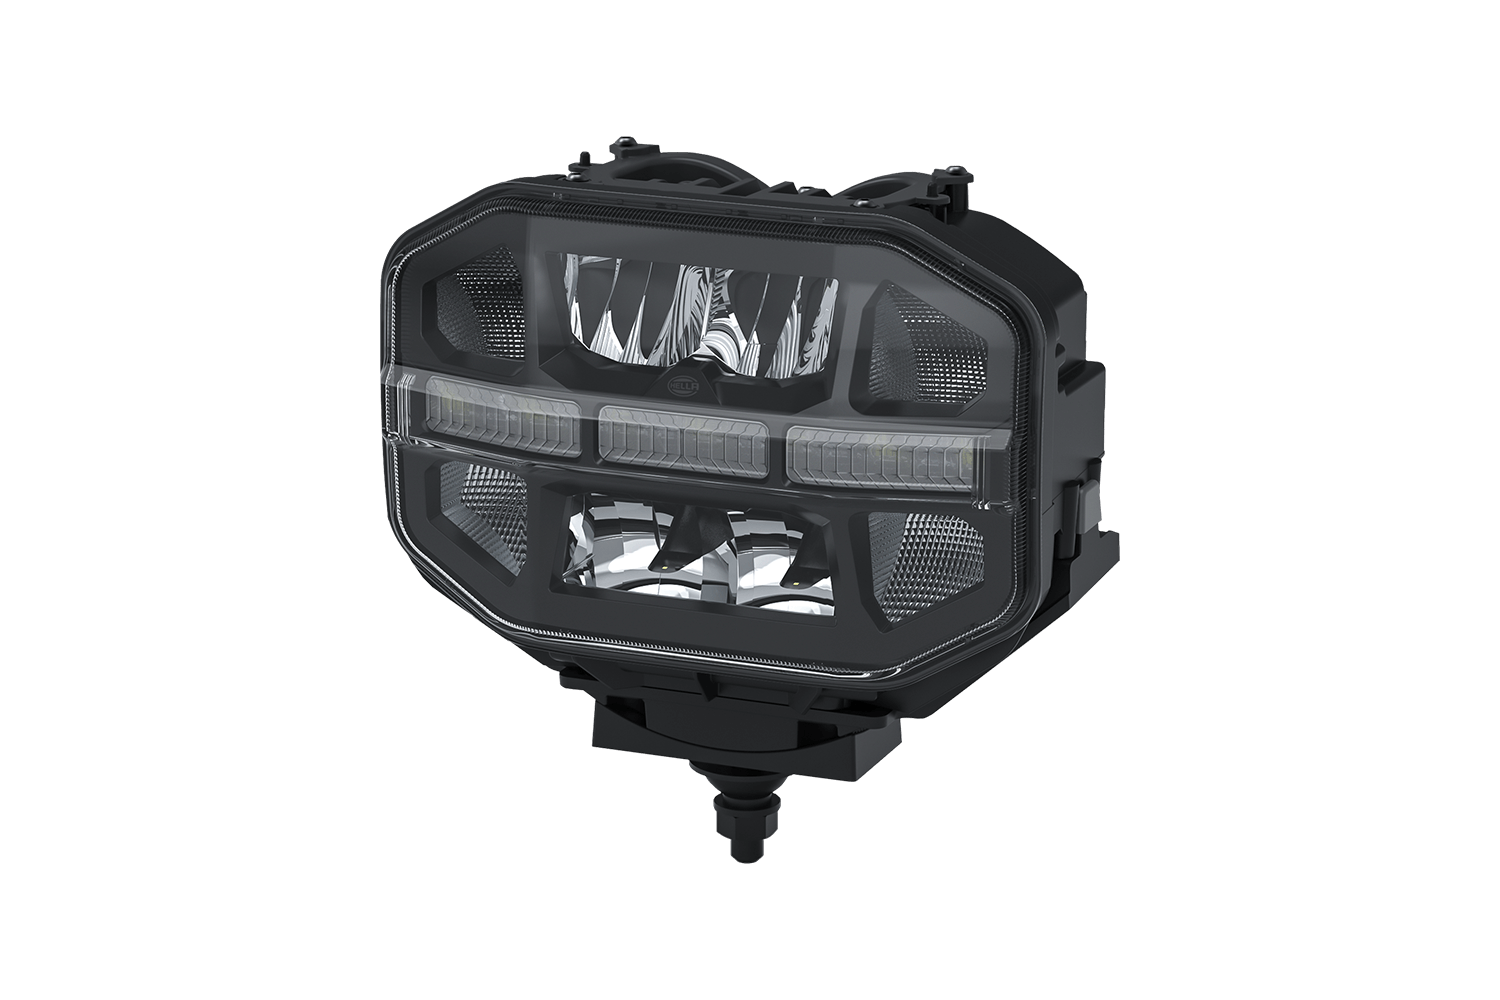 C240 LED combination headlamp from Hella offered by Patlon in Canada